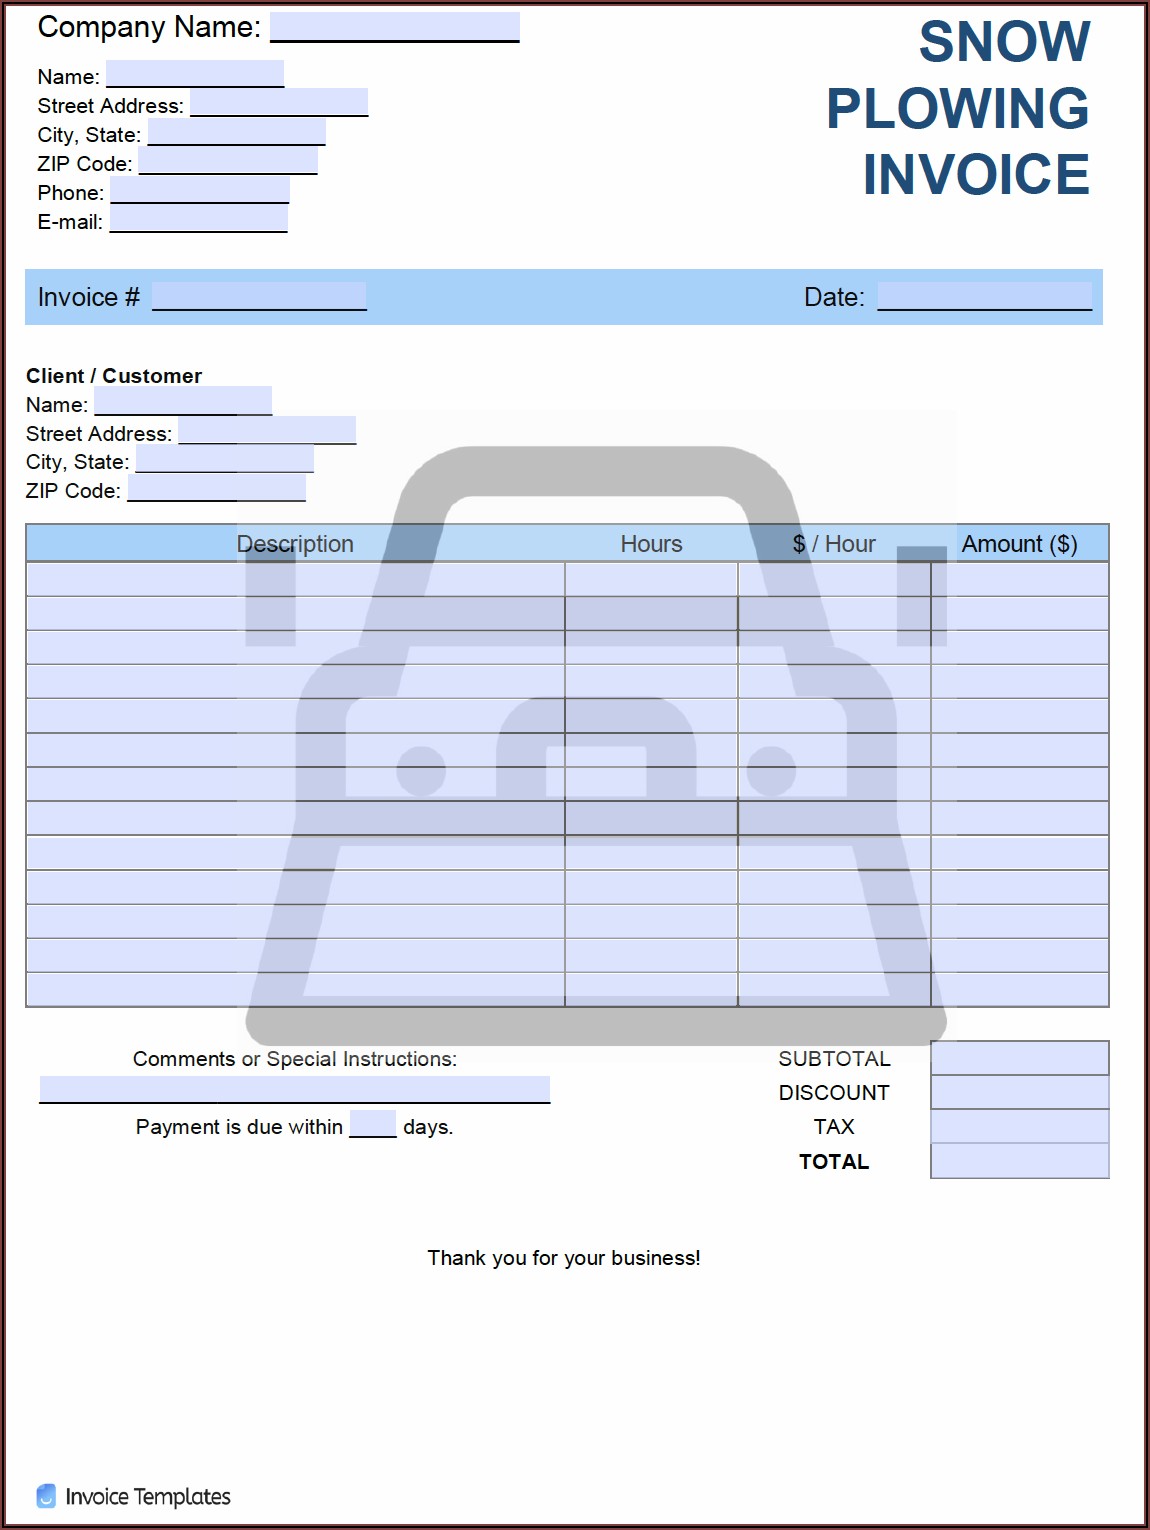 Snow Plowing Invoice Template